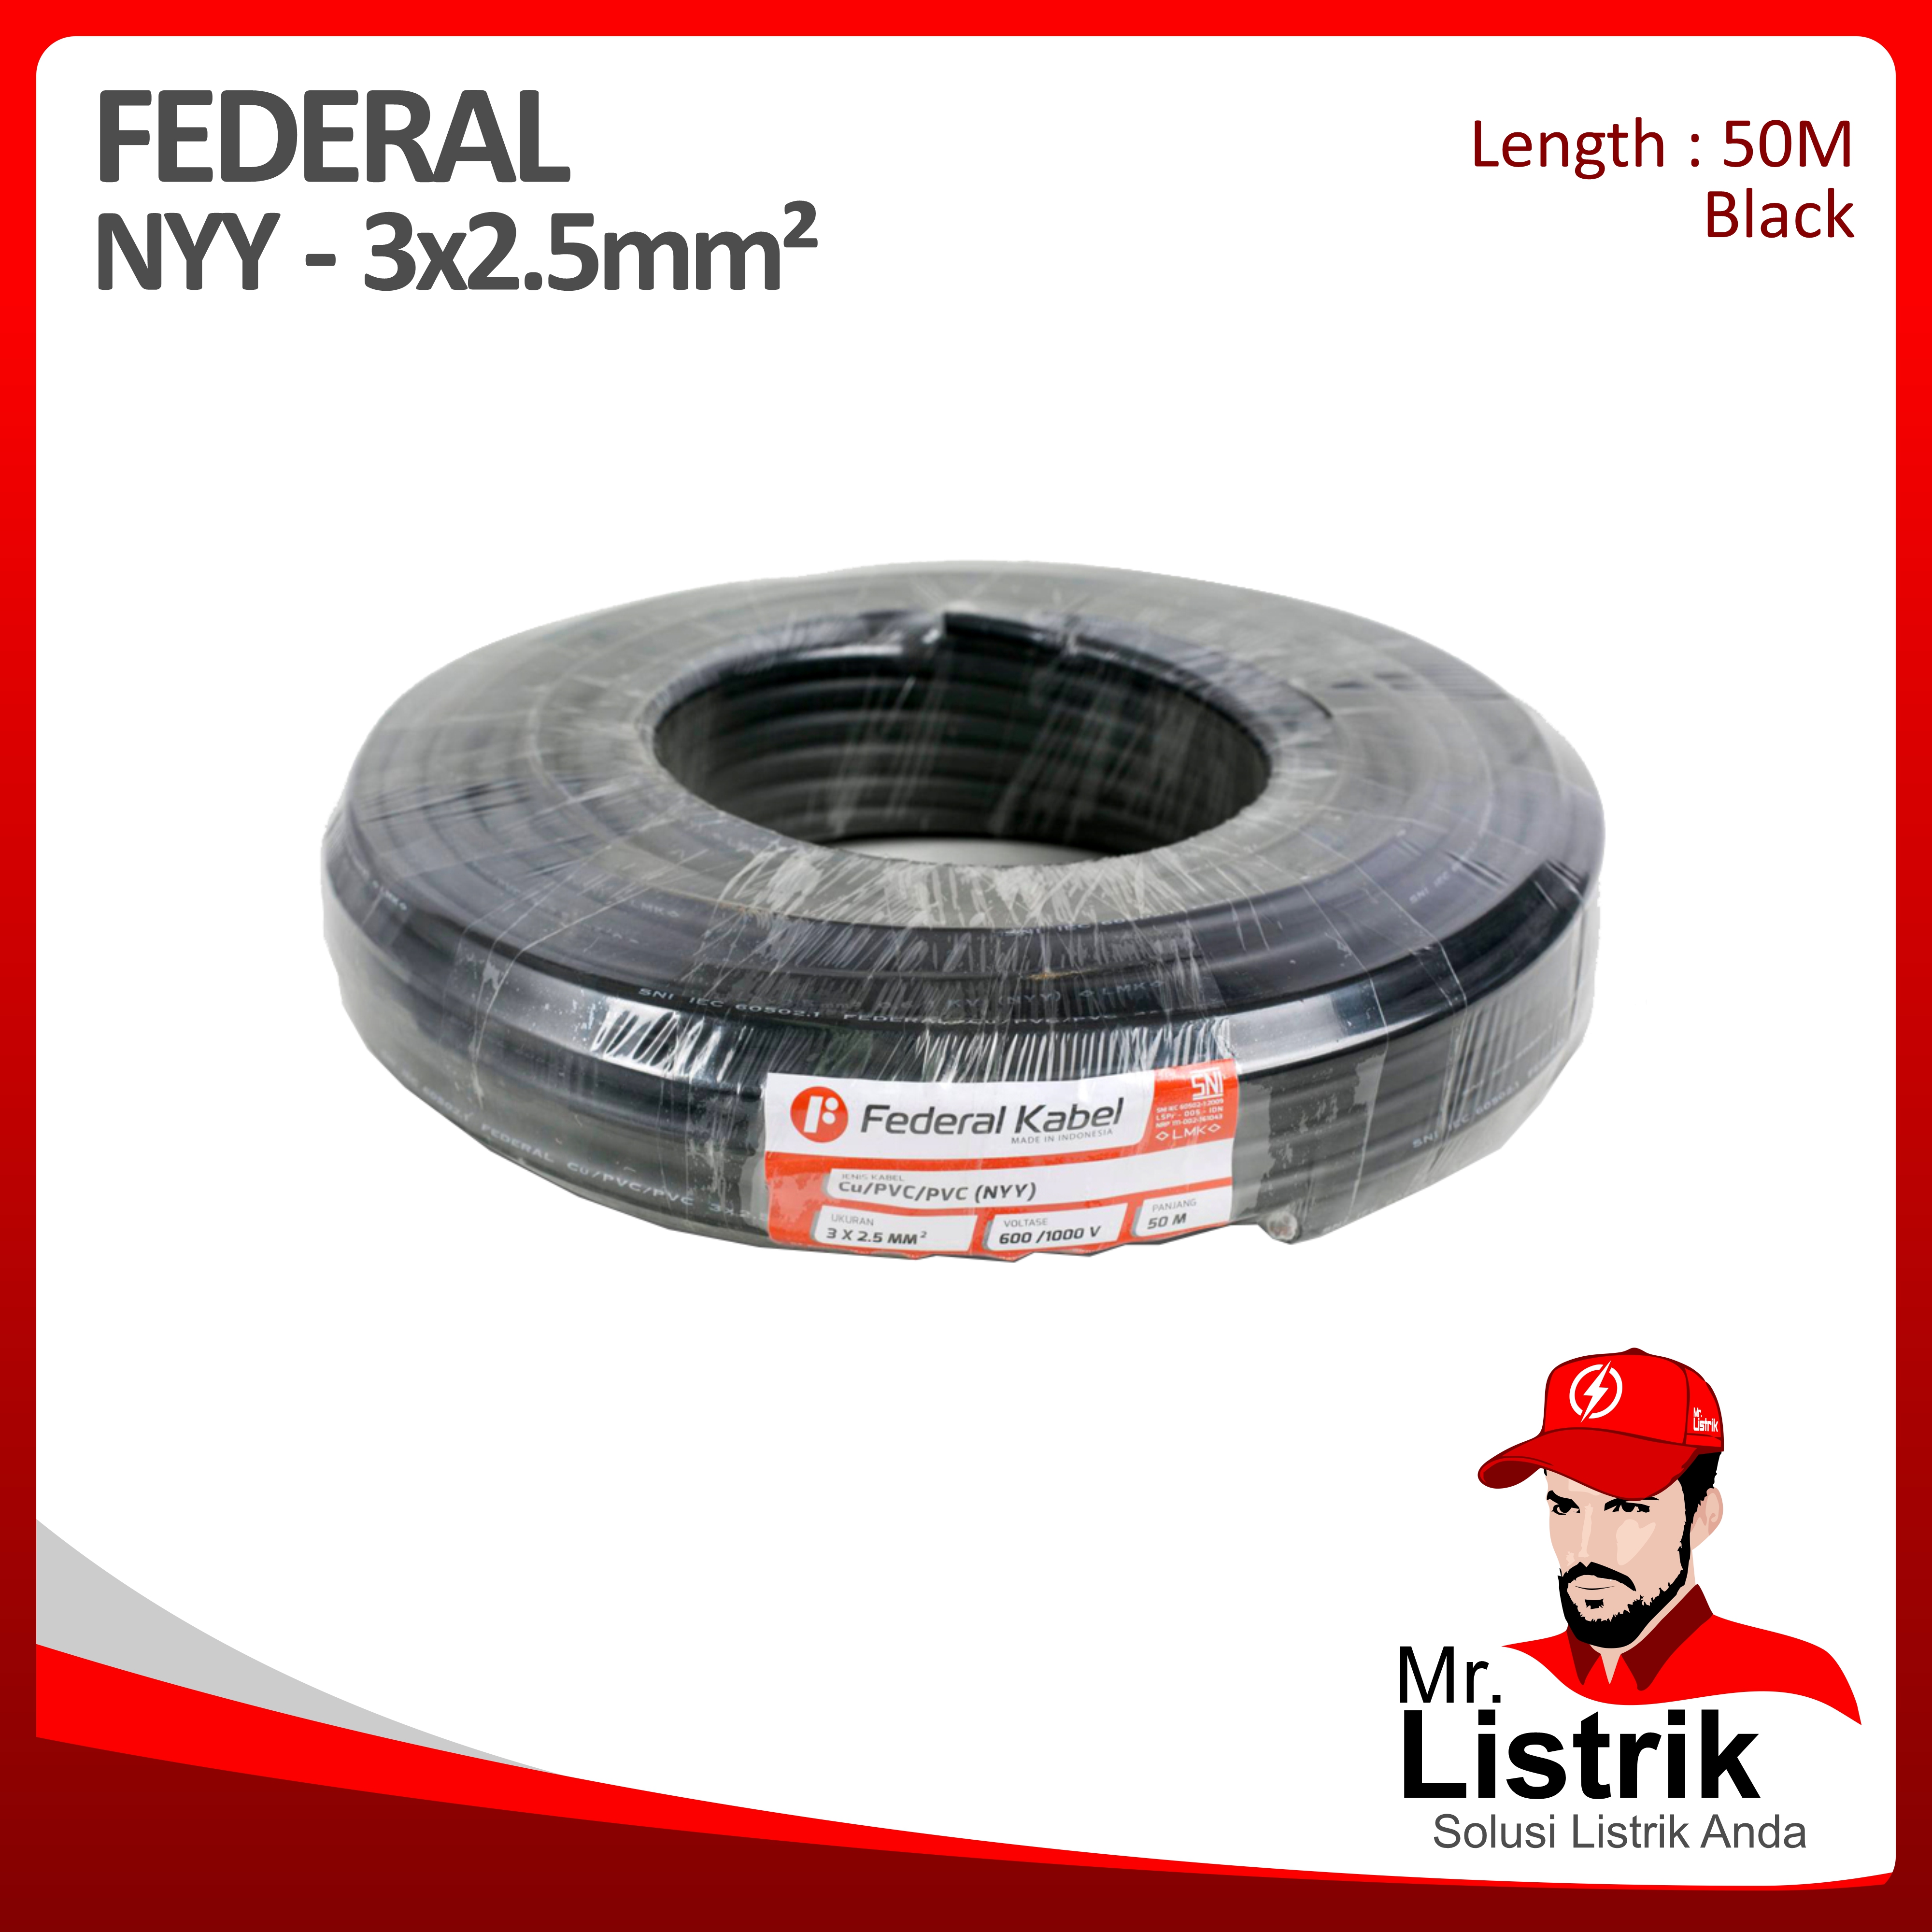 Kabel NYY Federal 3x2.5 mm² @50 Mtr